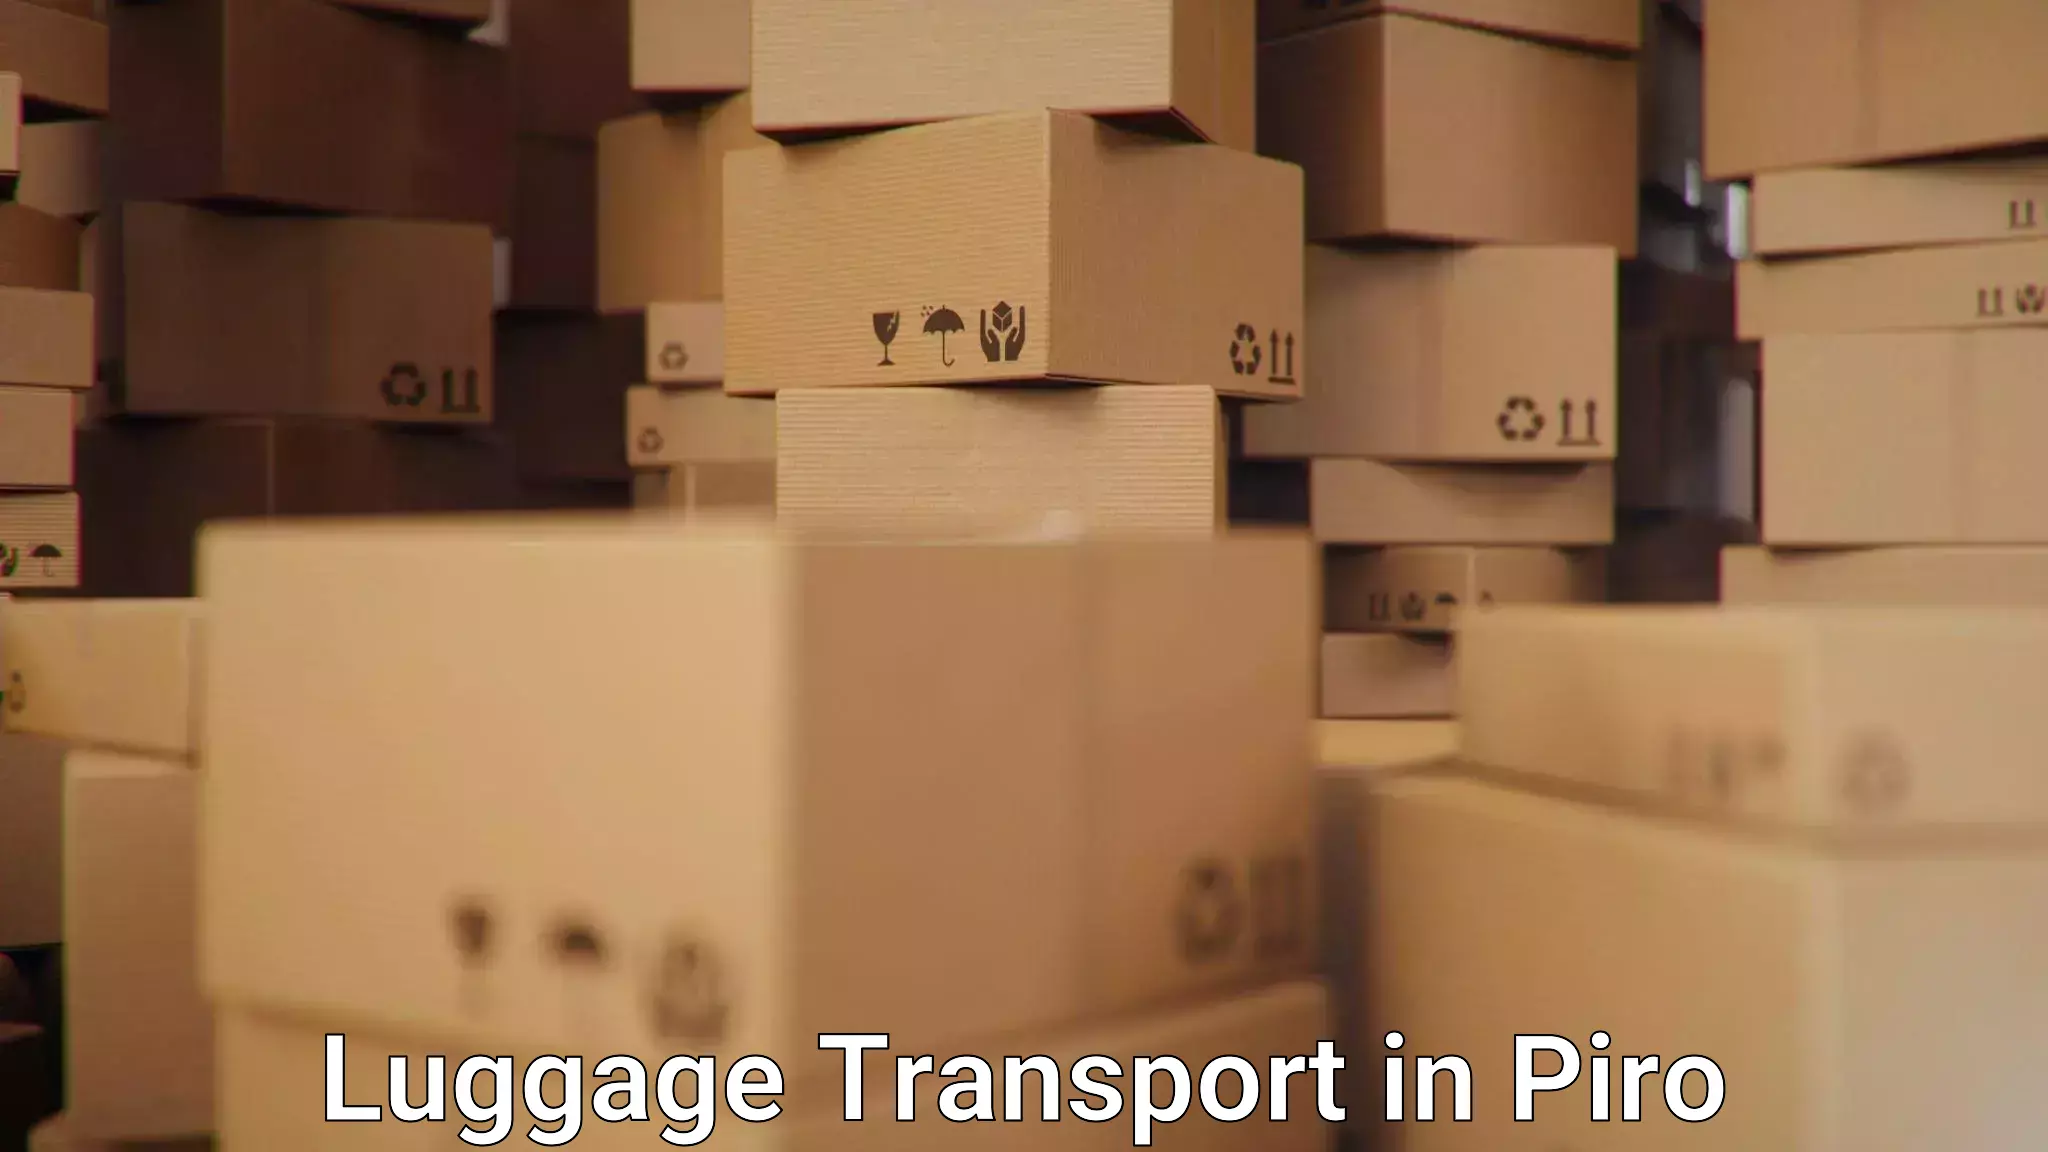 Instant baggage transport quote in Piro